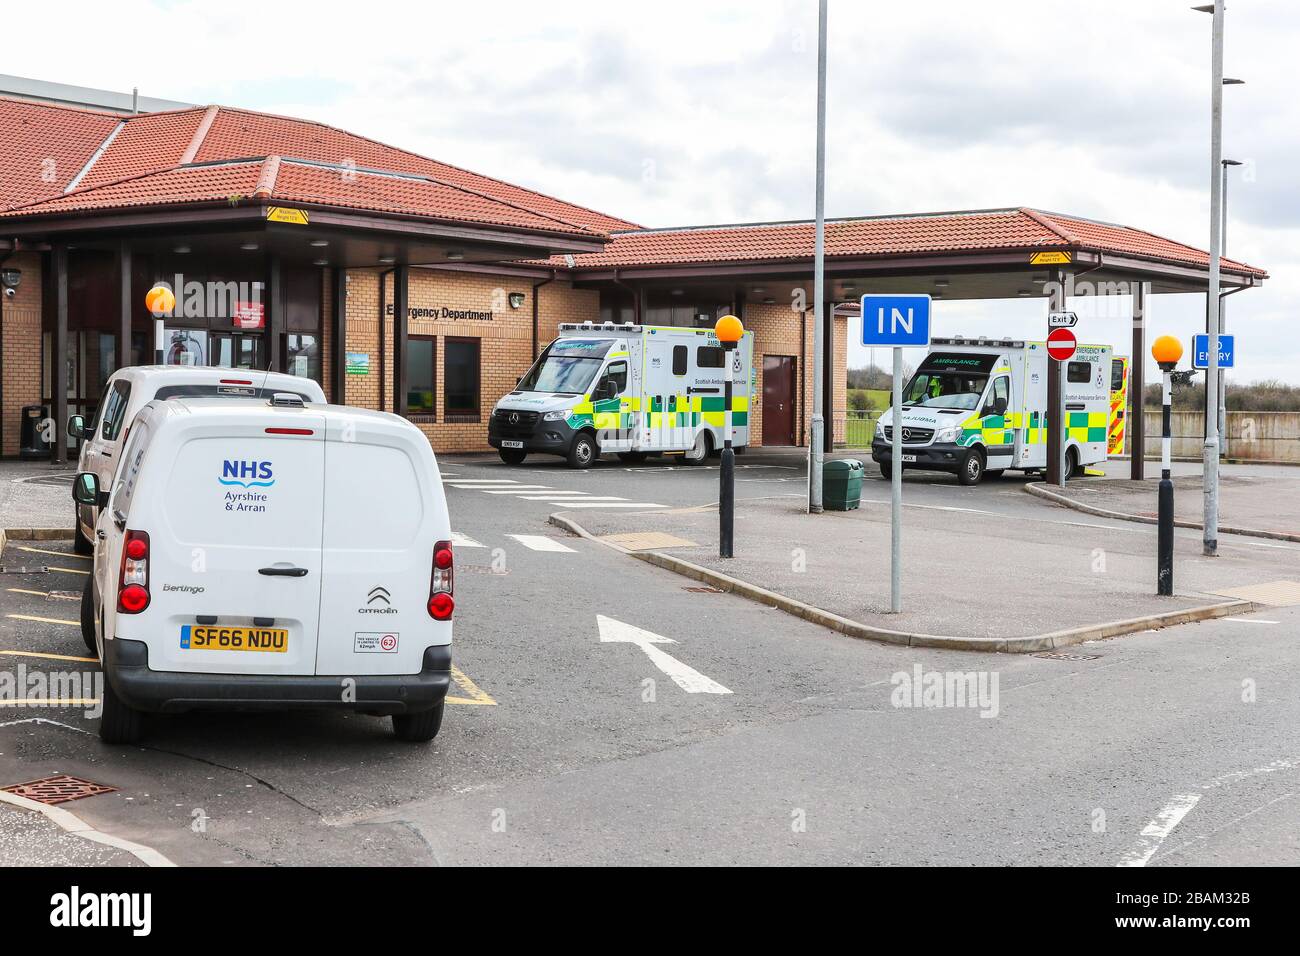 Two Ambulances from the Scottish National Health Service parked and ready for work, outside the emergency department of the University Hospital Ayr, A Stock Photo